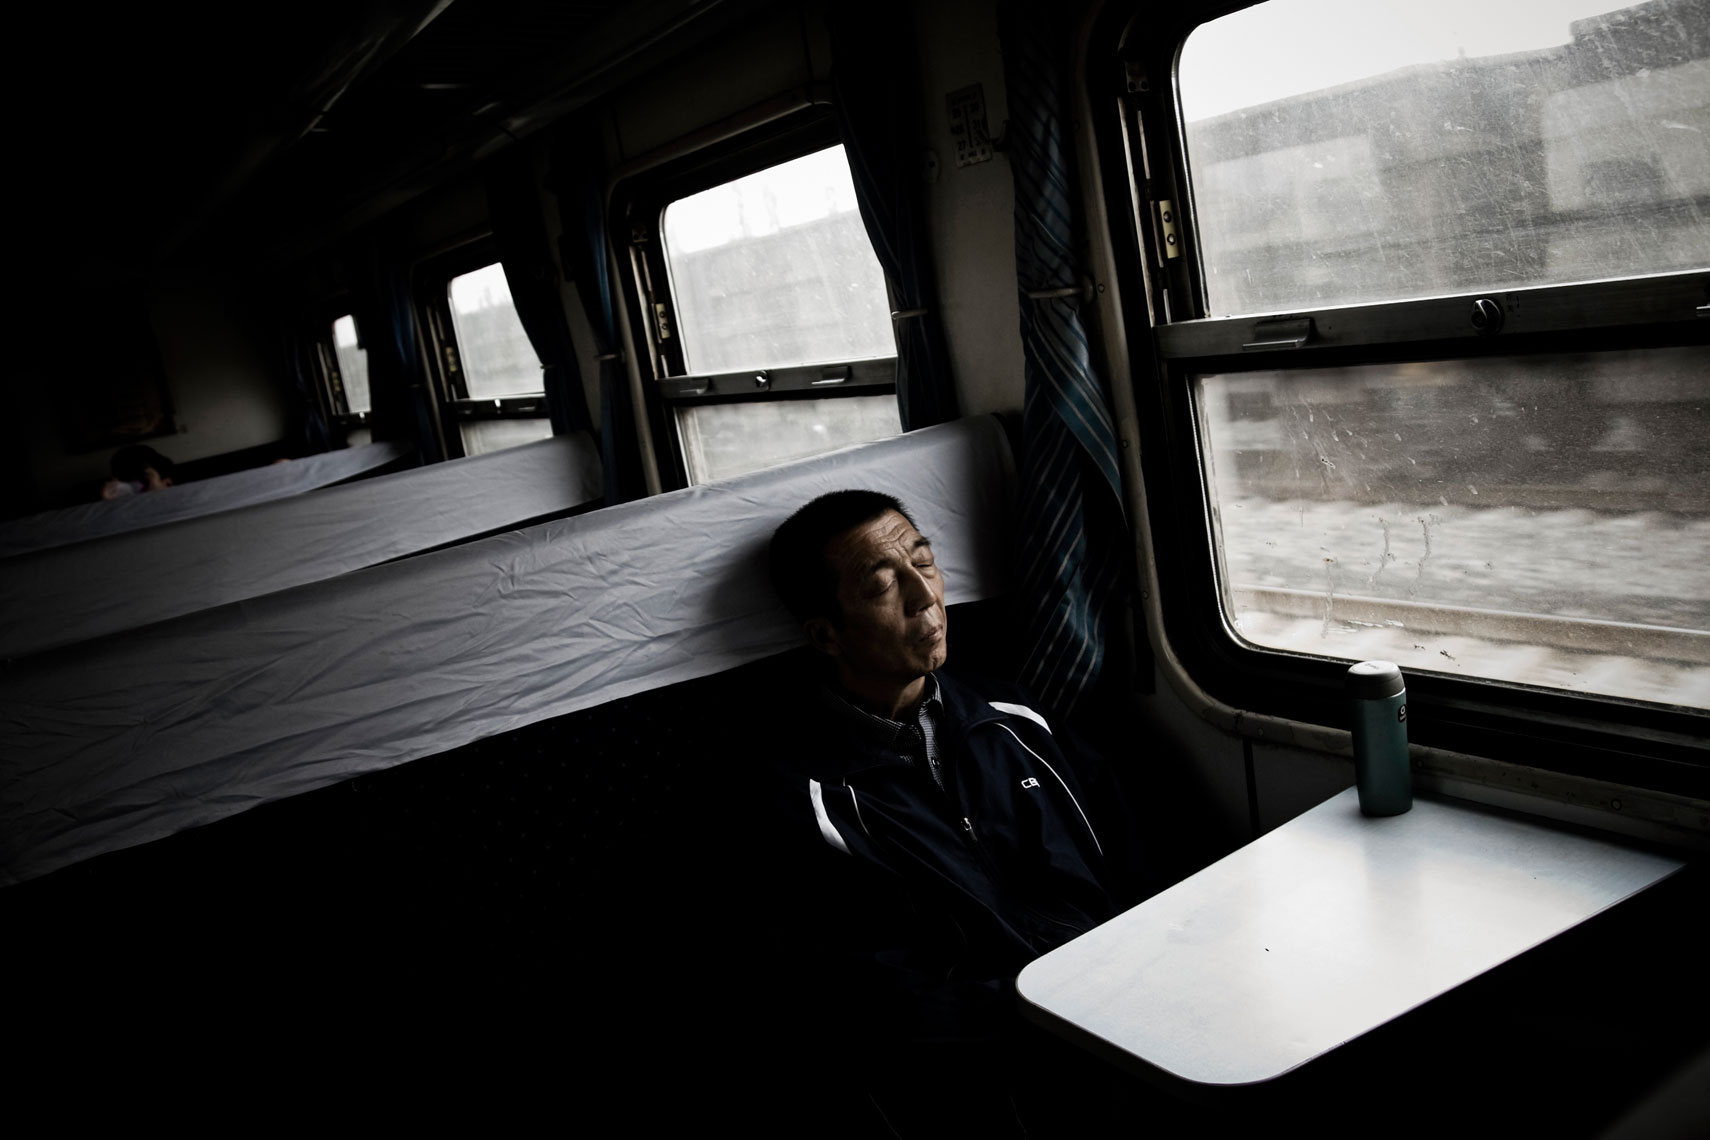 CHINA. Shanxi Province, September 2012. A man sleeping on the train that connects the cities of Datong and Ping Yao.